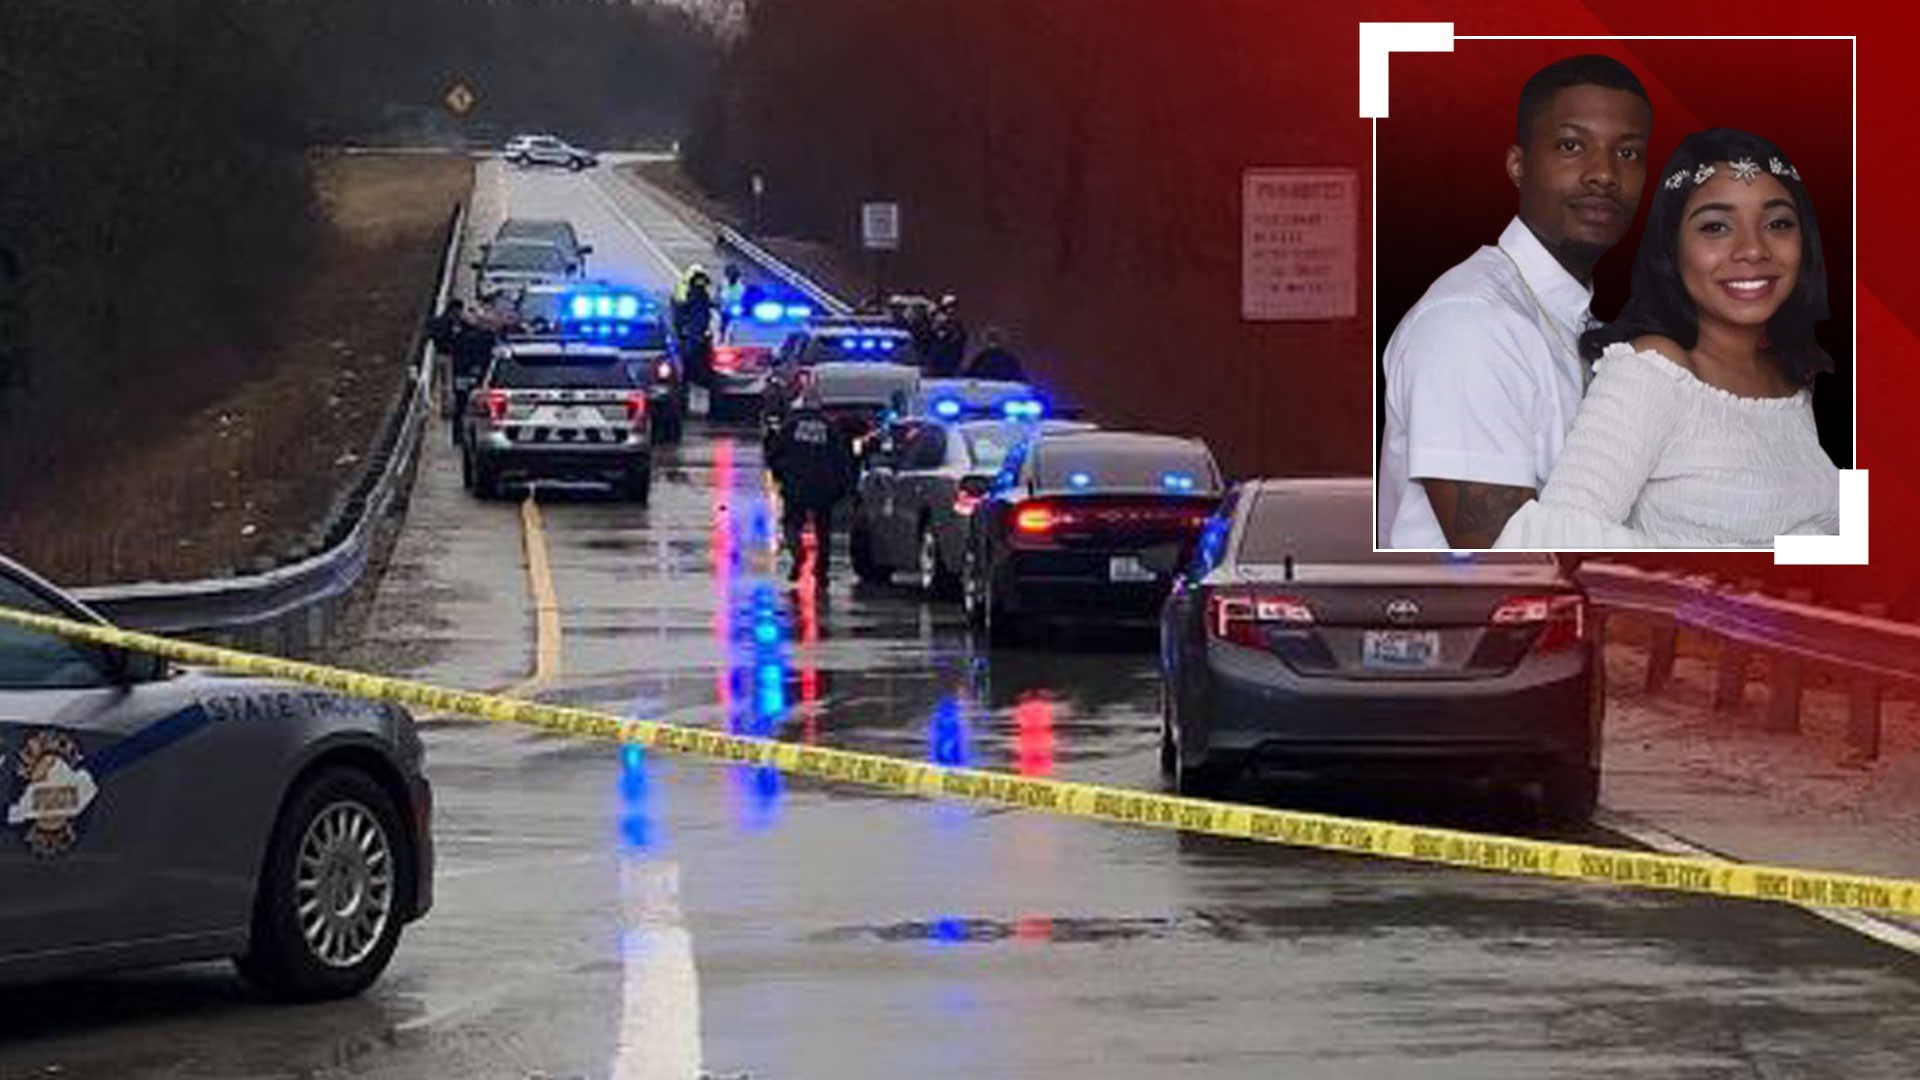 Police have identified two people killed during a pursuit in Oldham County, Kentucky. Police say the incident is connected with an abduction case out of Ohio.